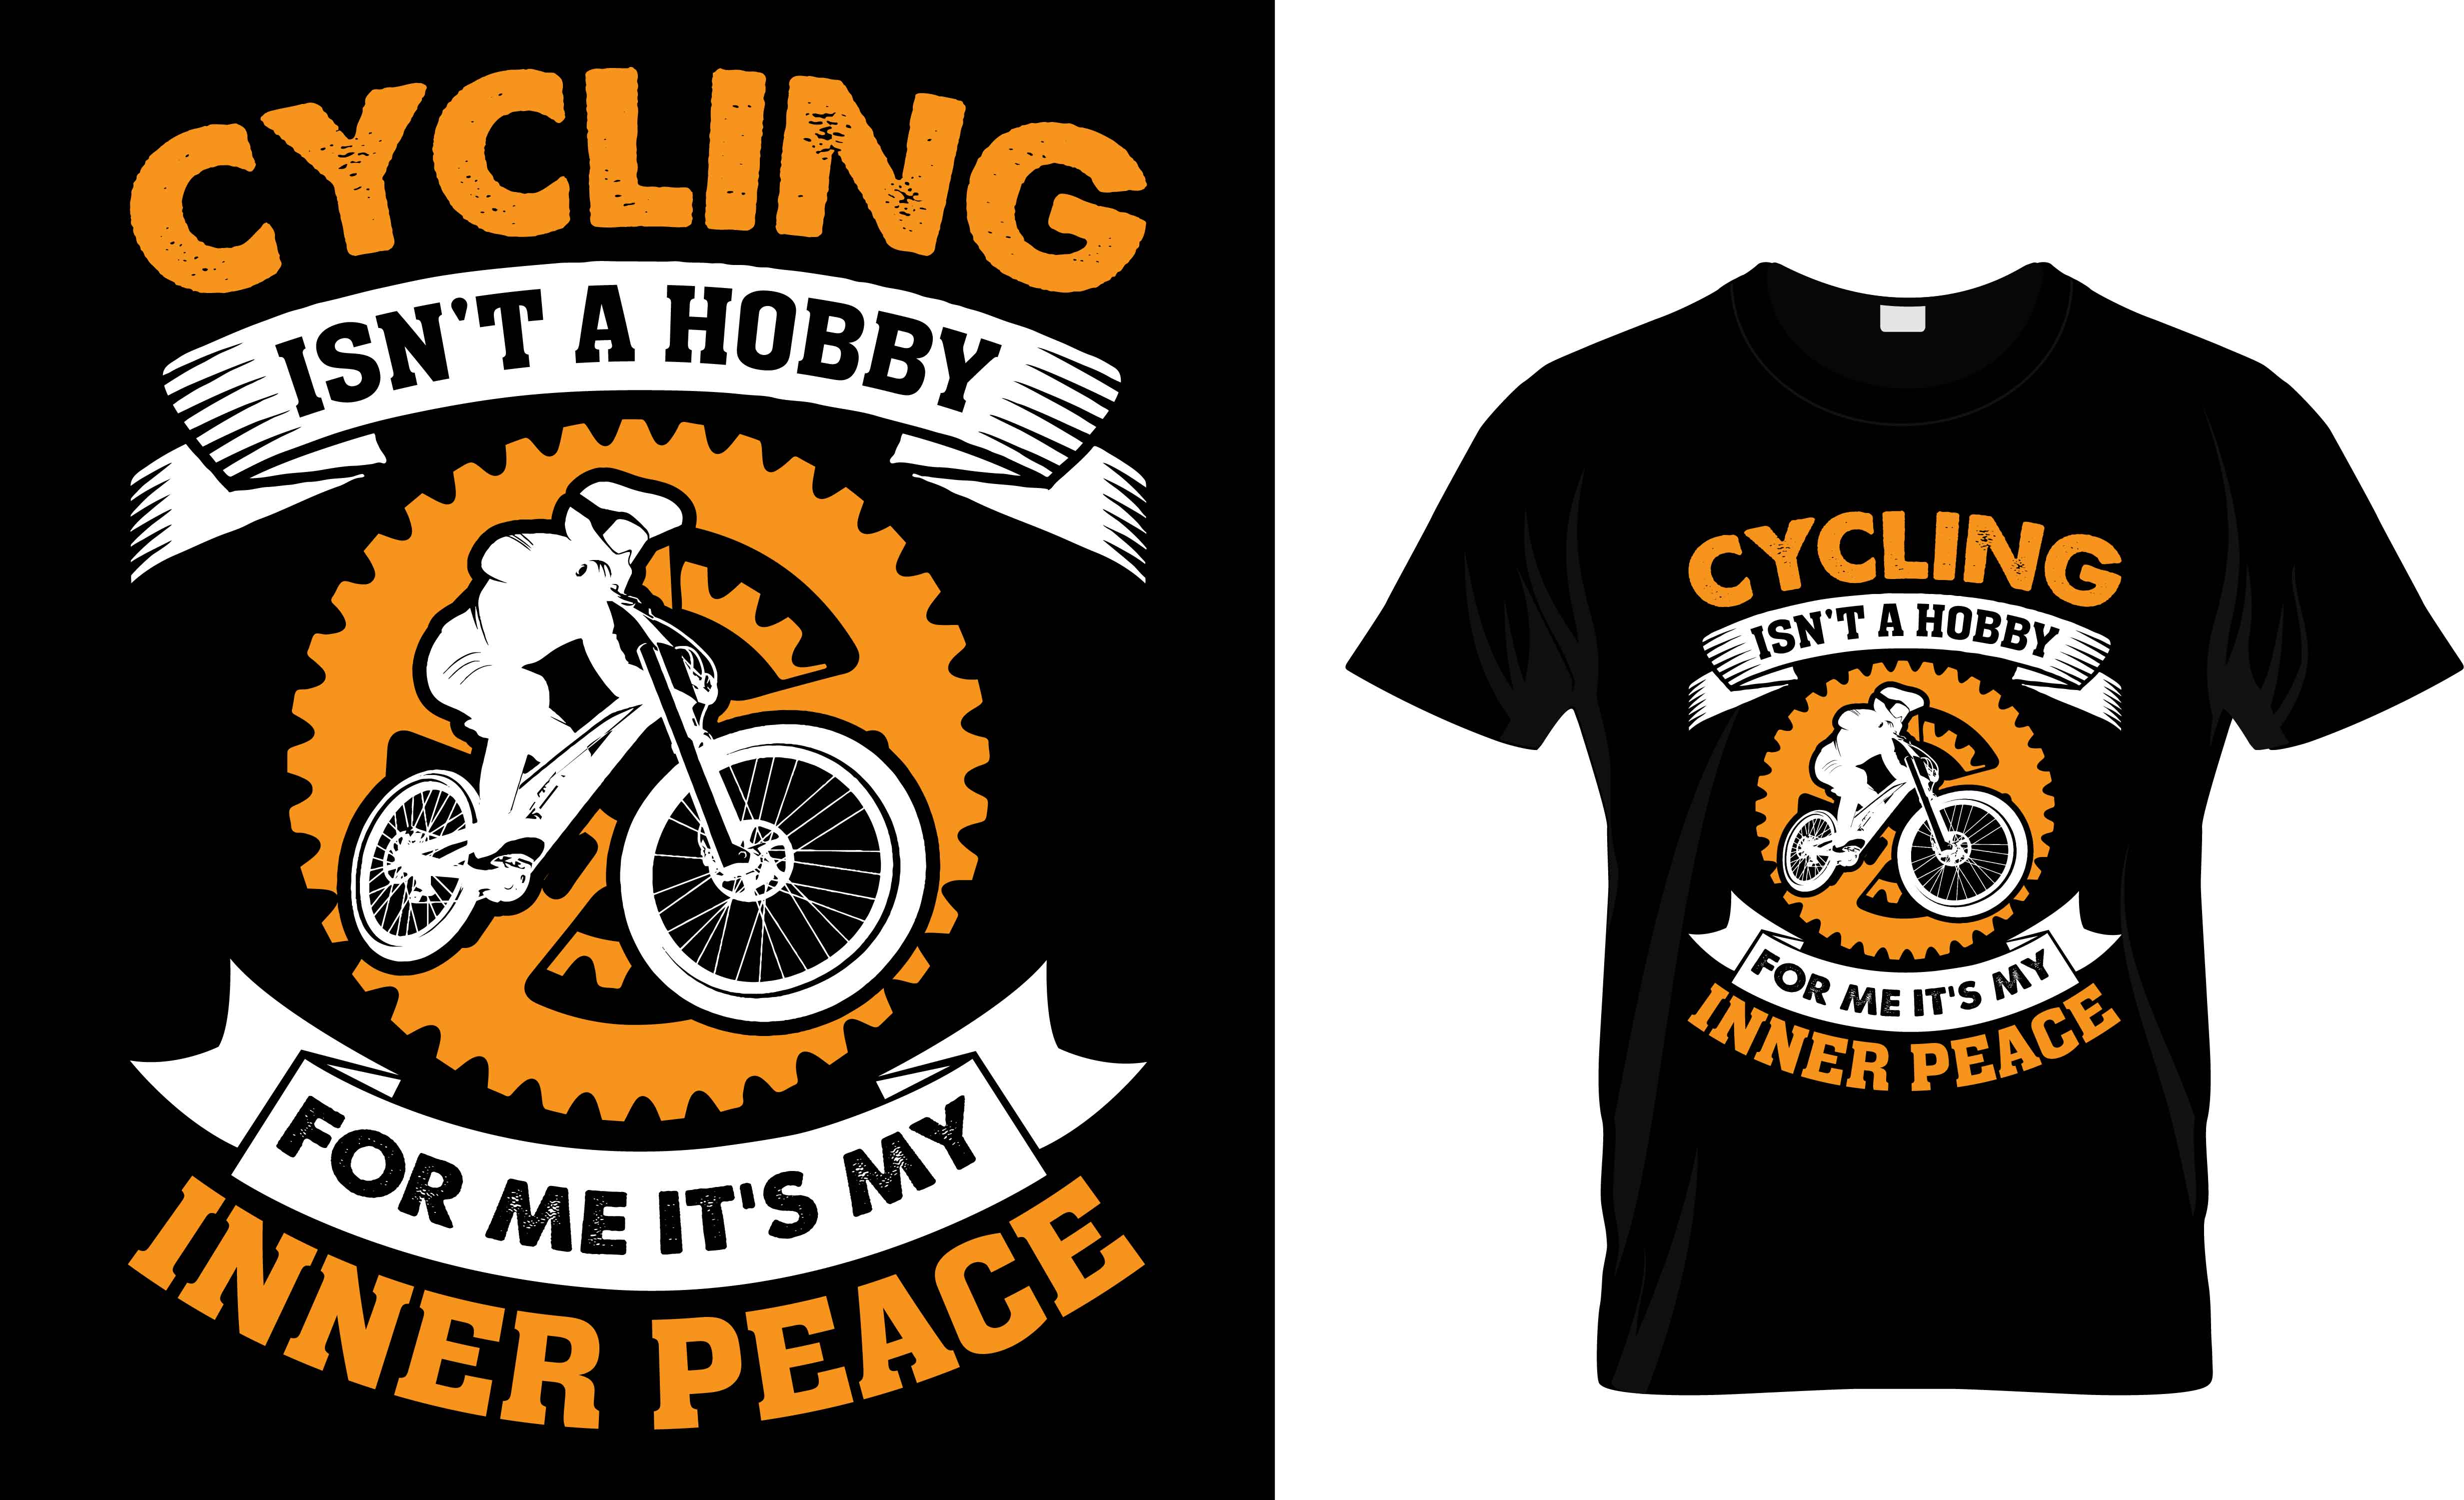 Black t-shirt with cycler and orange font.